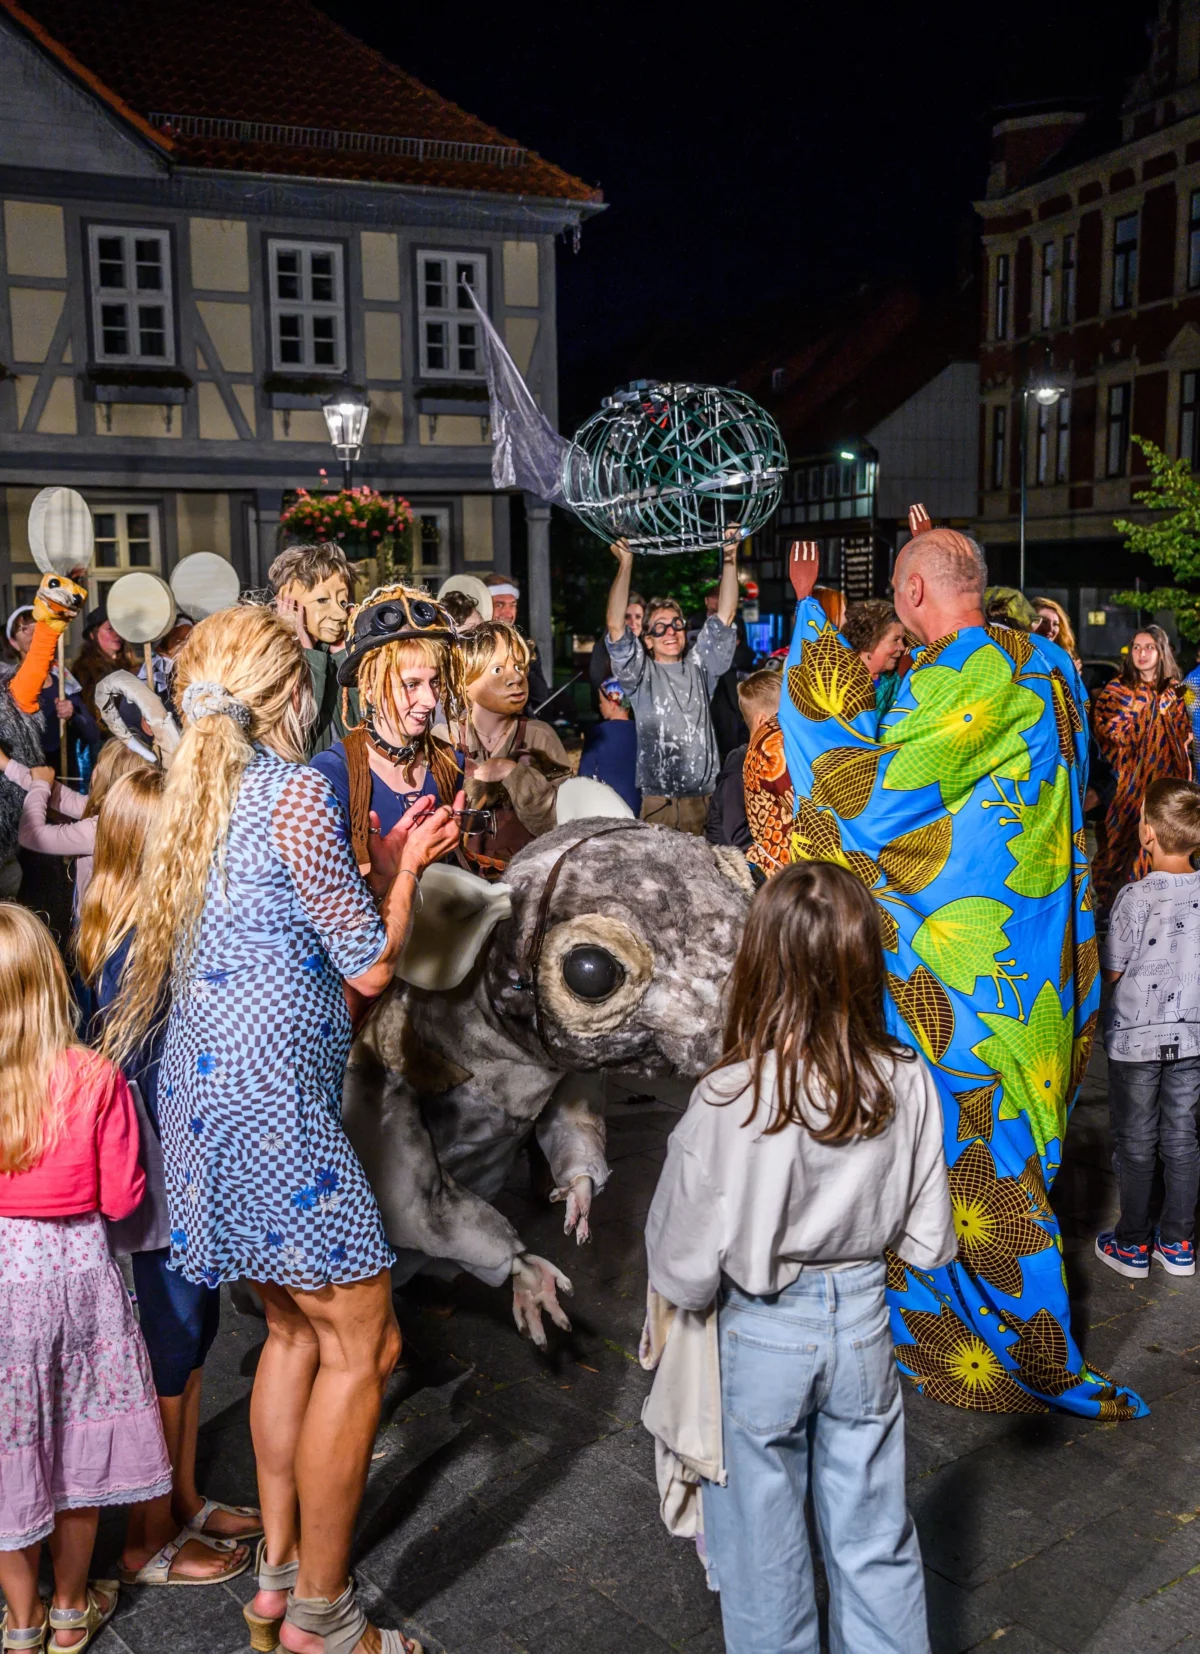 Marketplace. A crowd of adults and children. In between, people in colorful robes and masks. In focus a performer who is in a big rat costume. It looks like she is riding the rat.